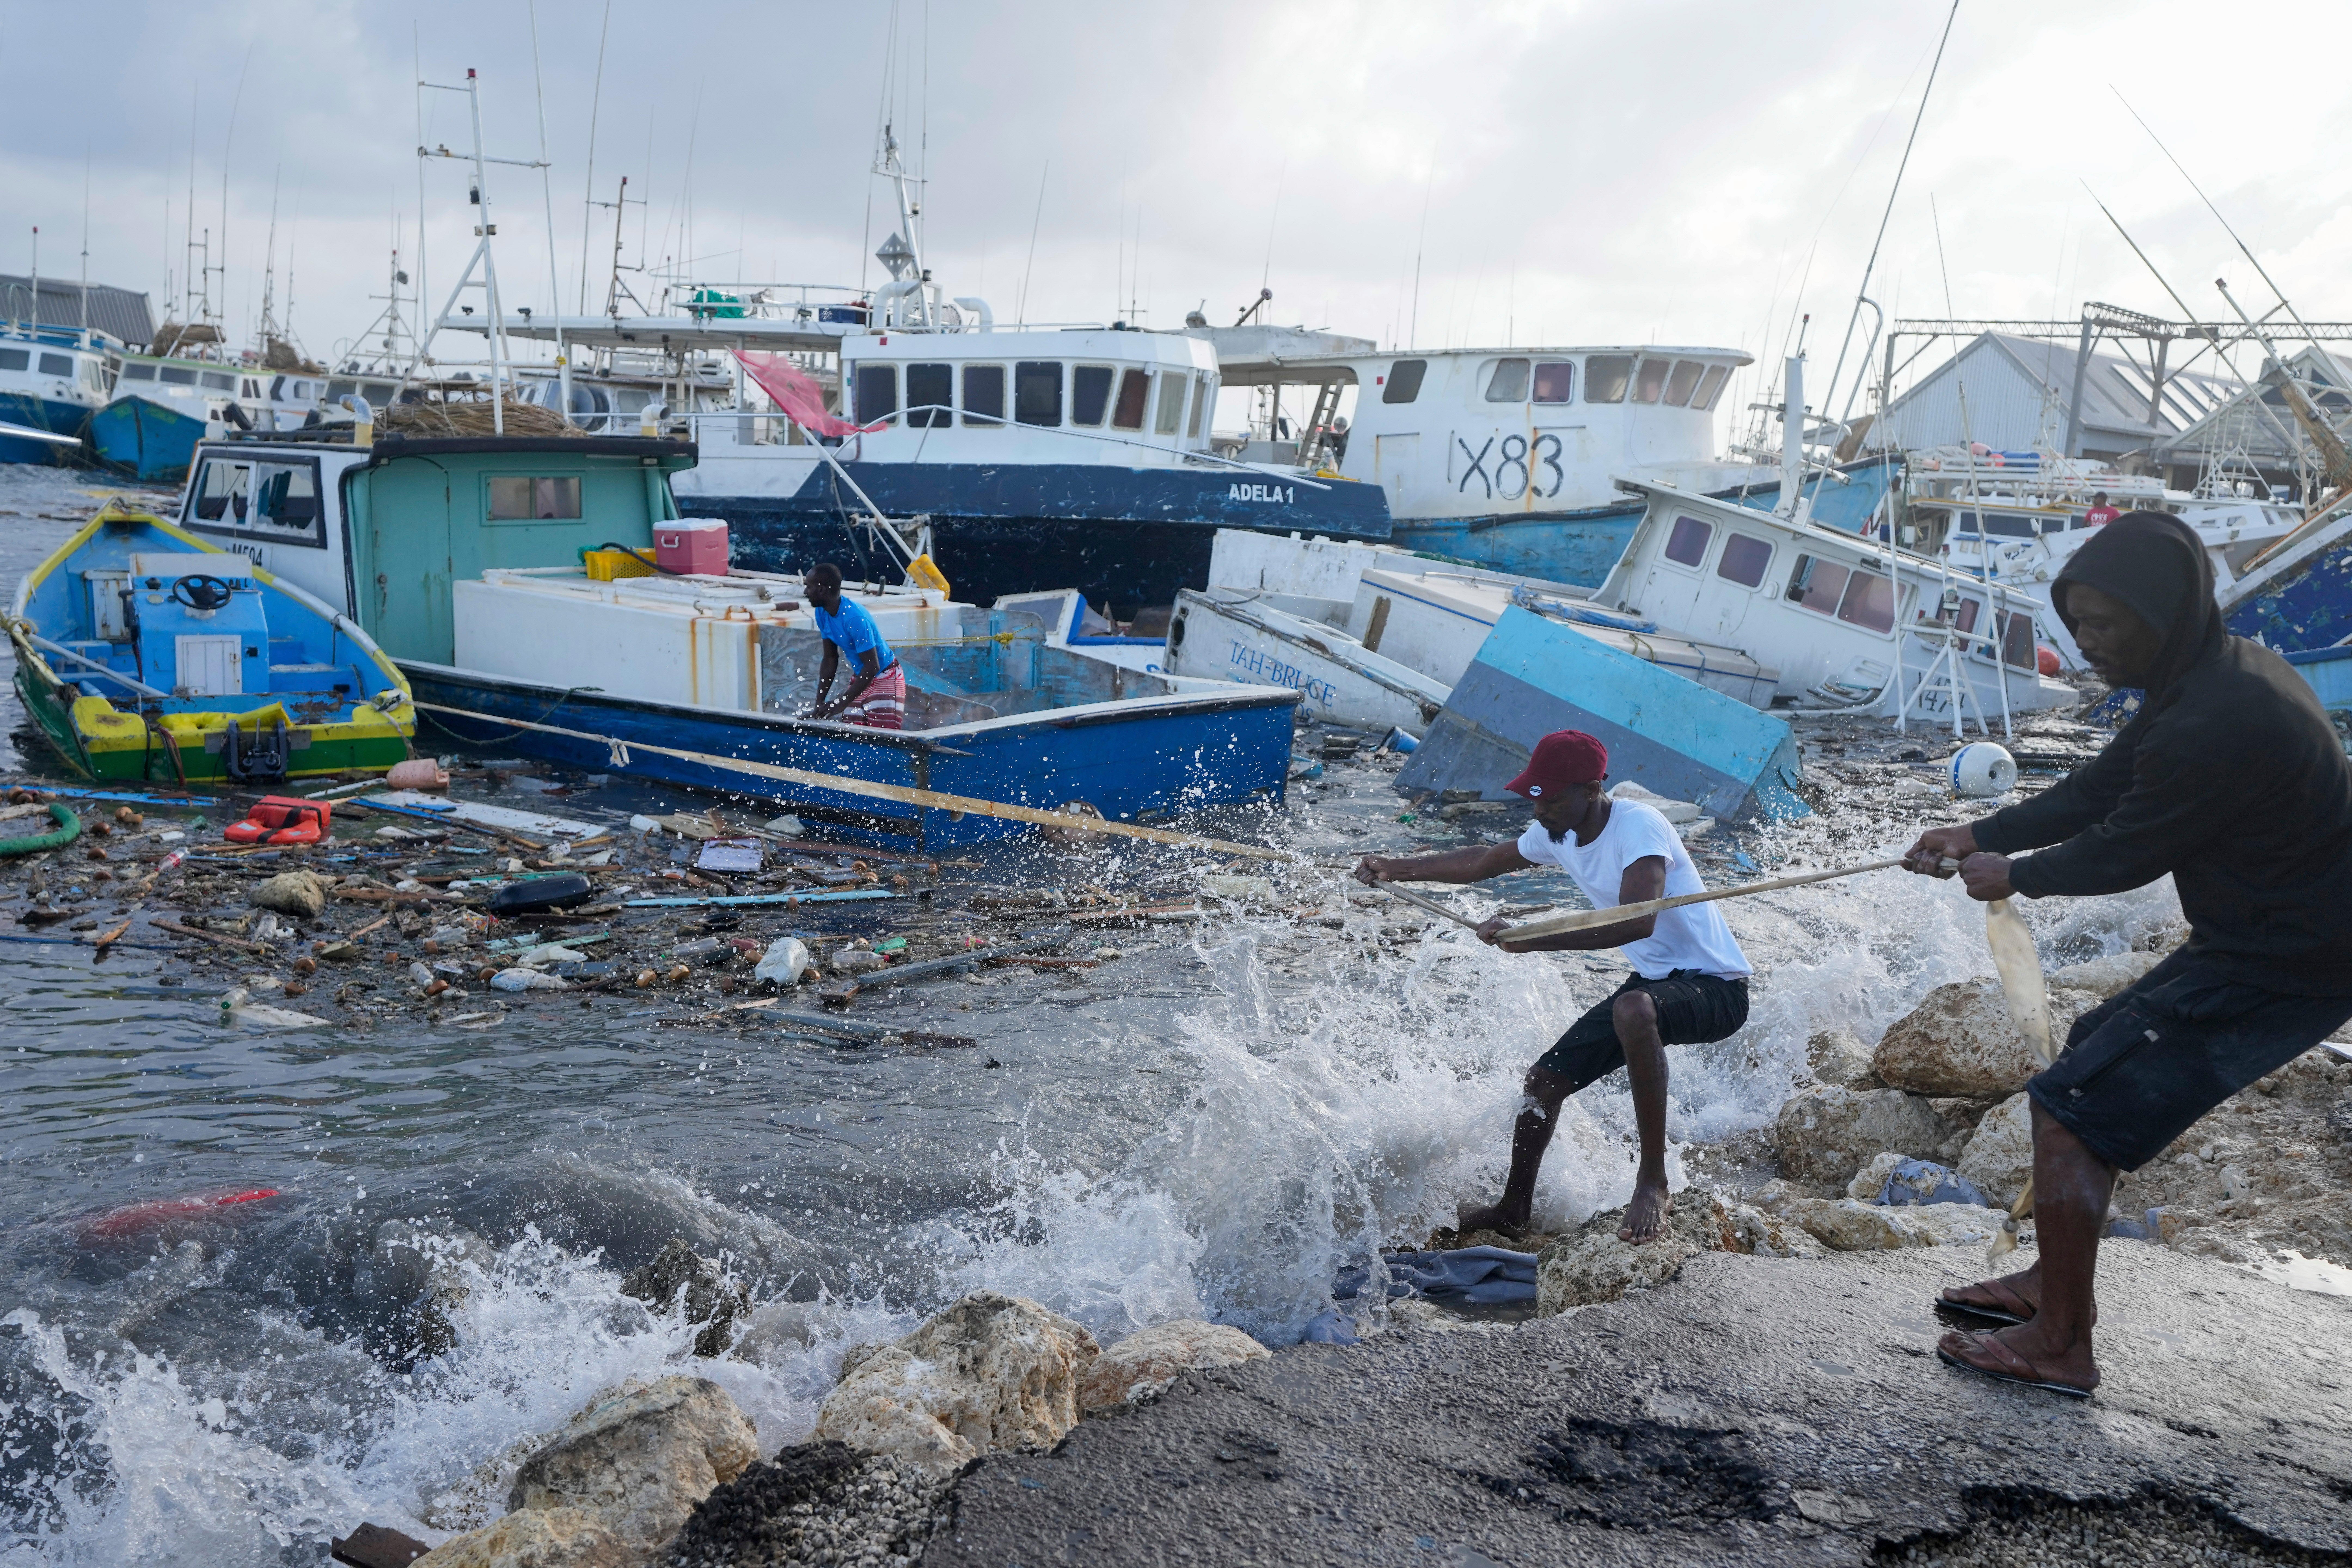 Fishermen try to pull a wrecked boat from the water after Hurricane Beryl struck Barbados on Monday.